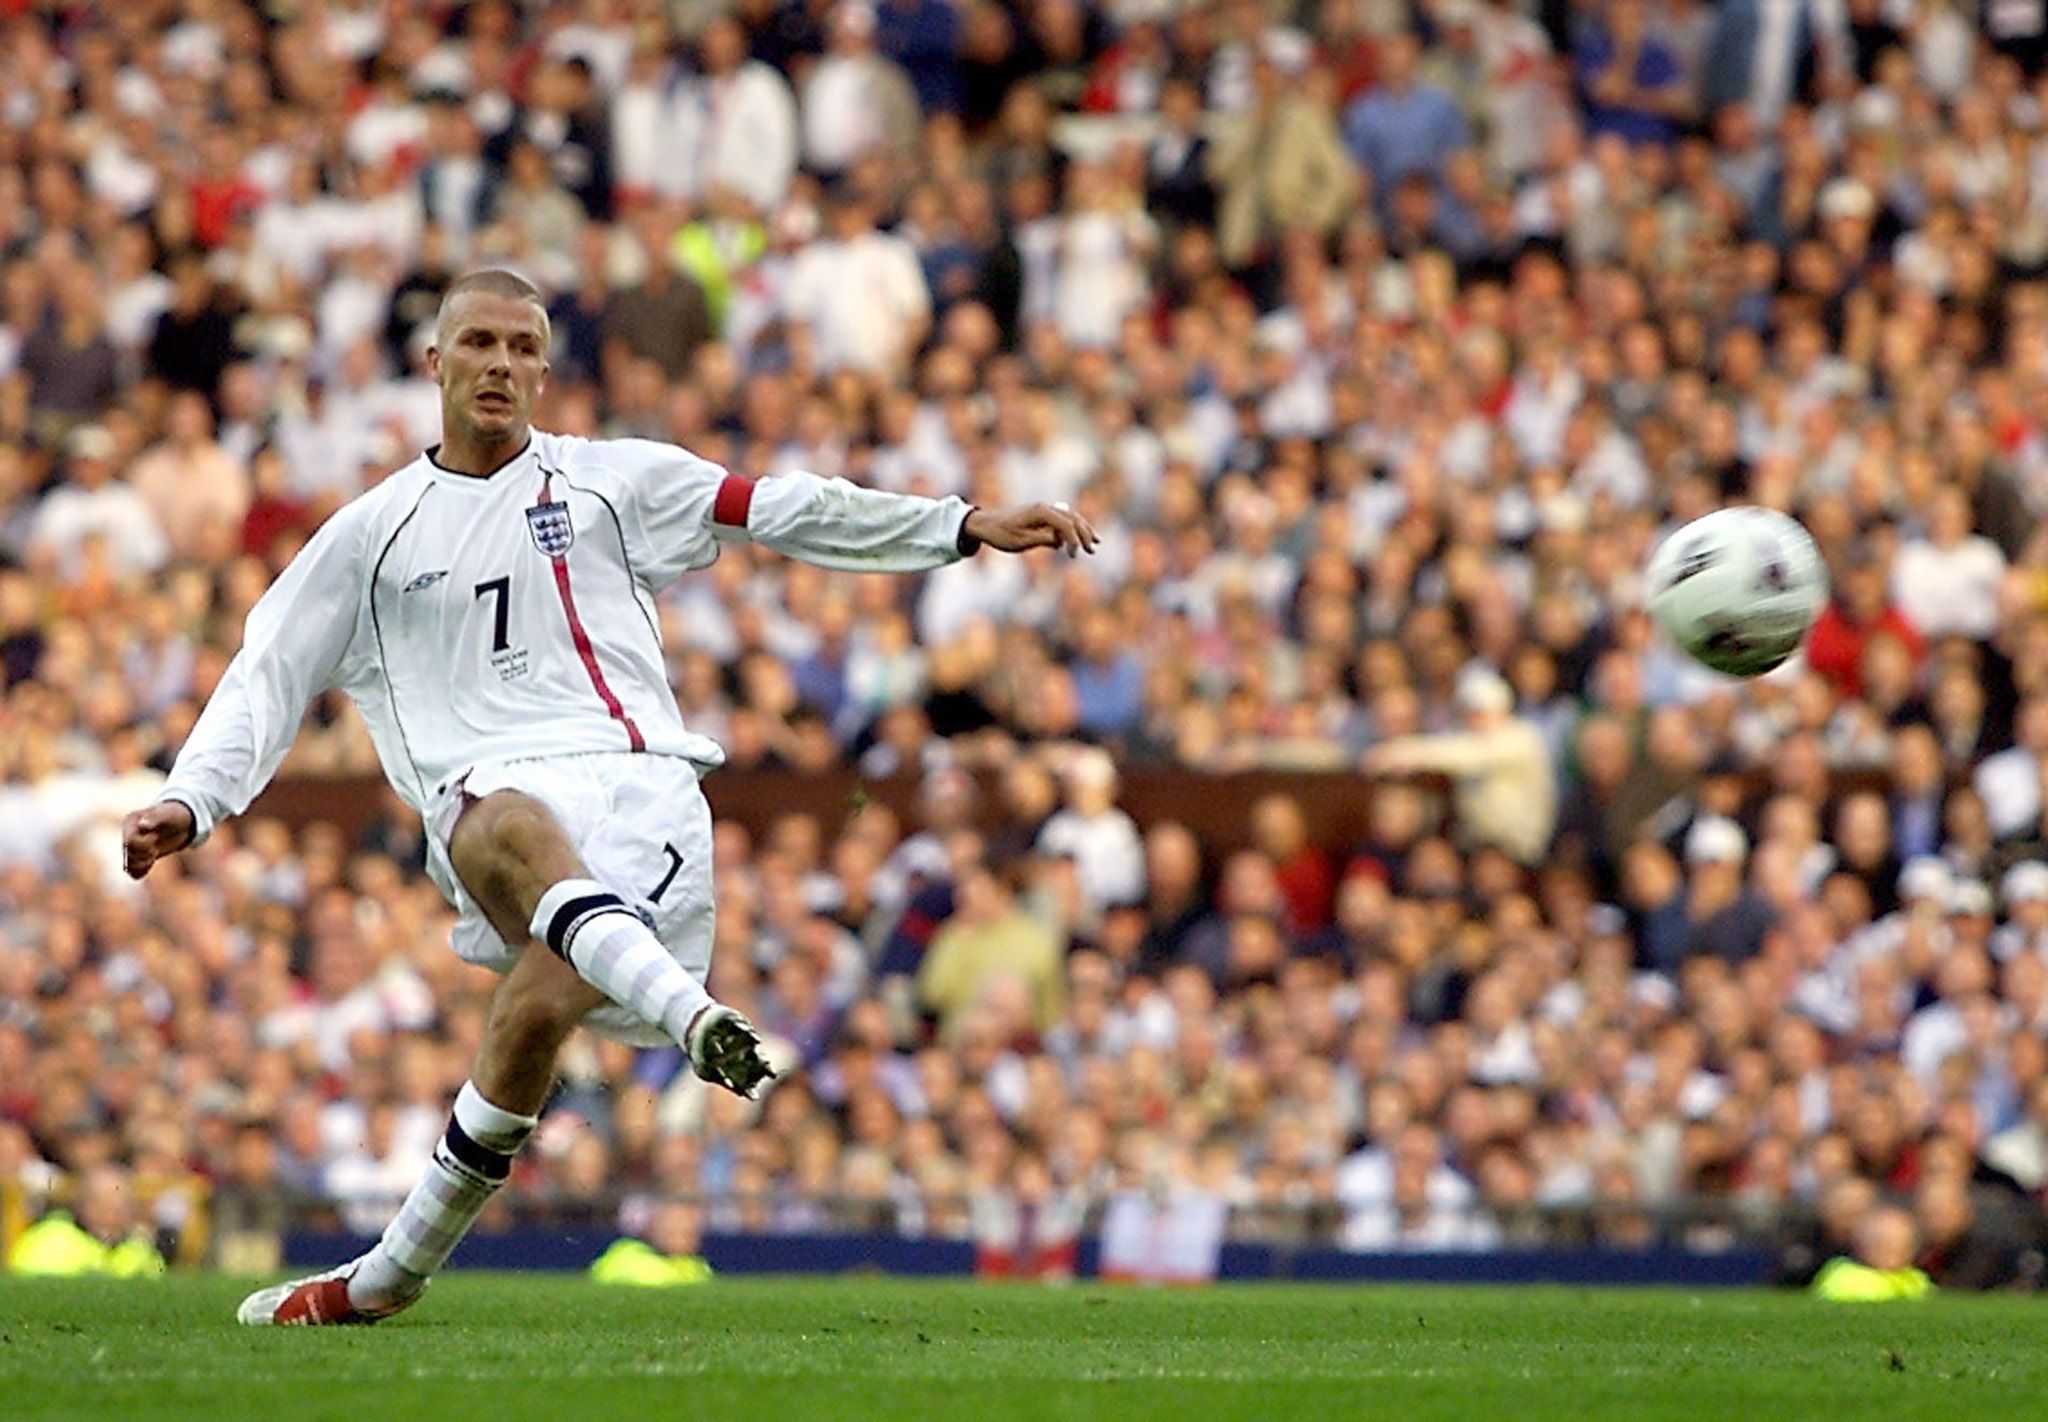 England's David Beckham scores against Greece in qualification for 2002 World Cup